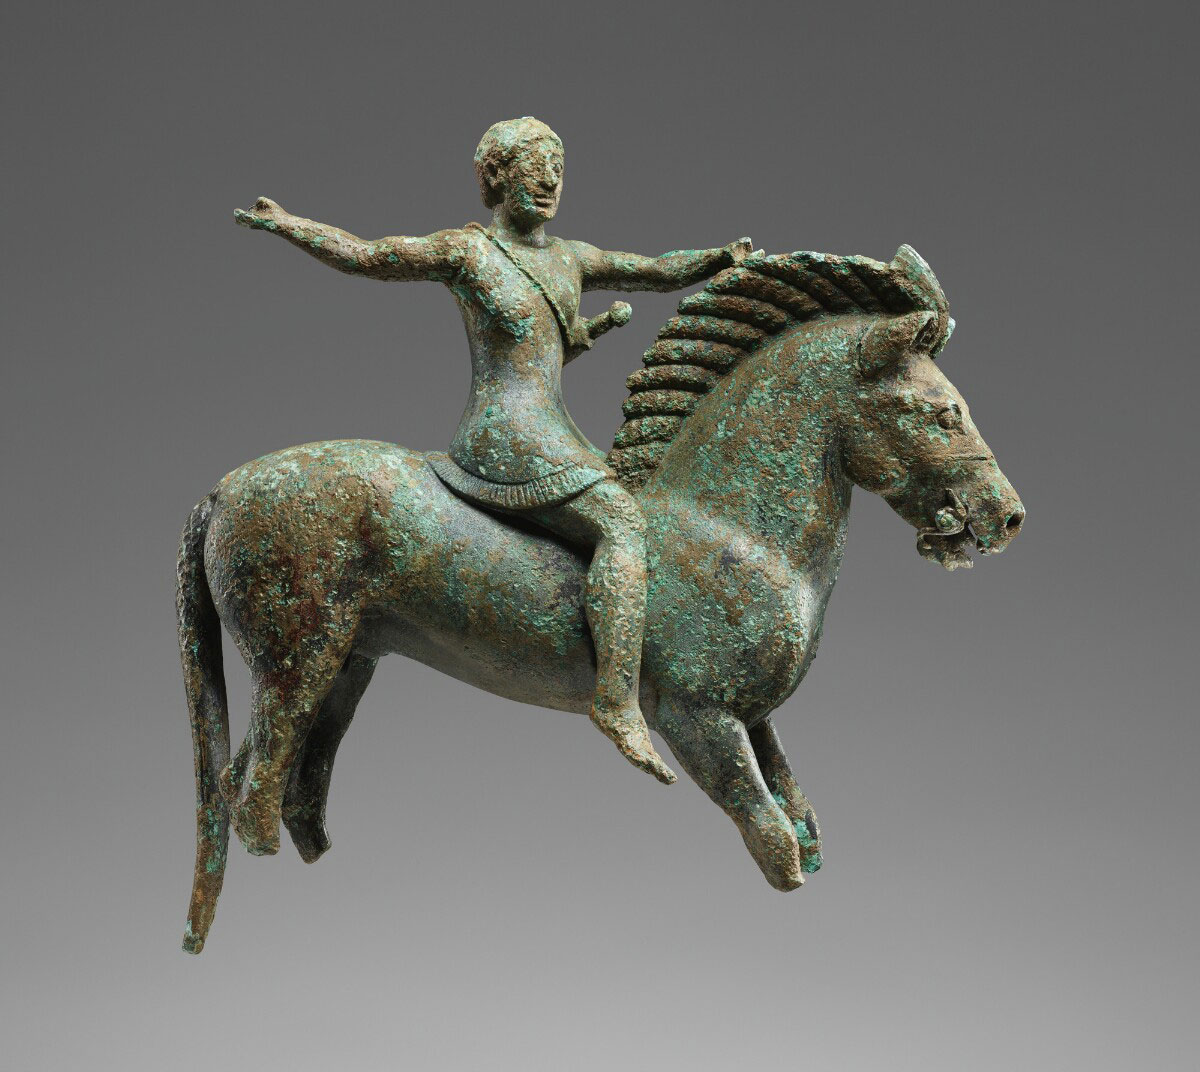 Pulled from a field in Albania, a 2,500-year-old statuette comes to Getty